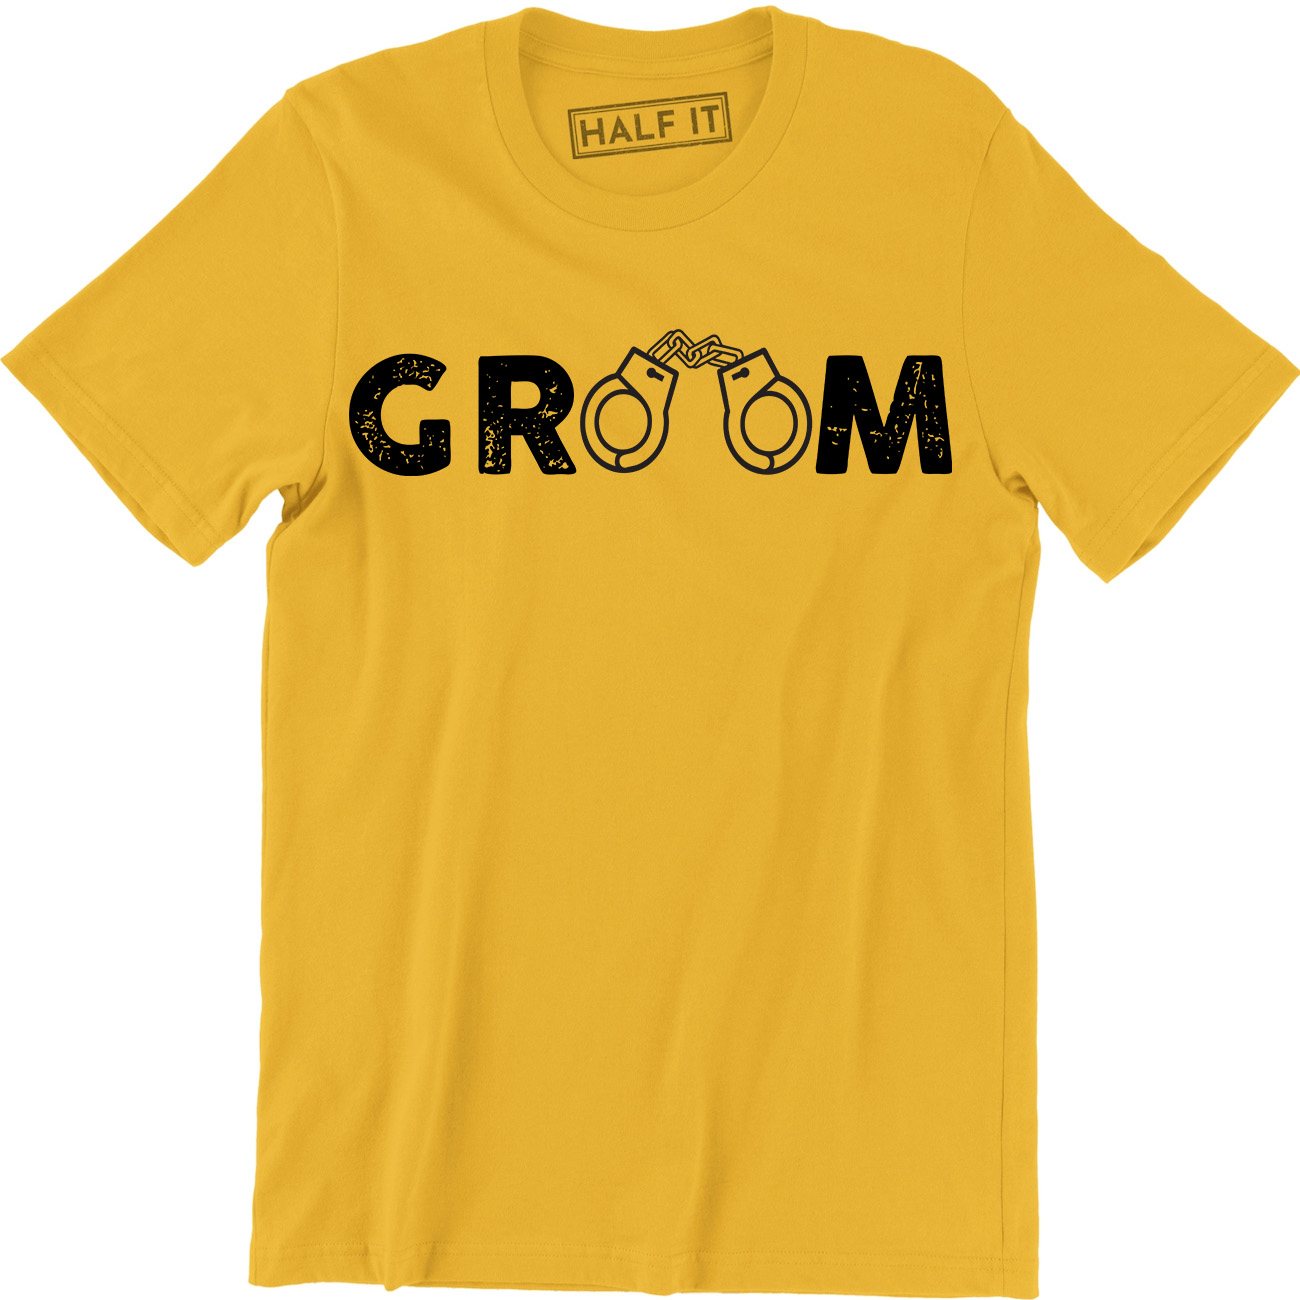 Groom Bridal Party Bachelor Wedding Funny Cool Idea Group Men T-Shirt - image 1 of 4